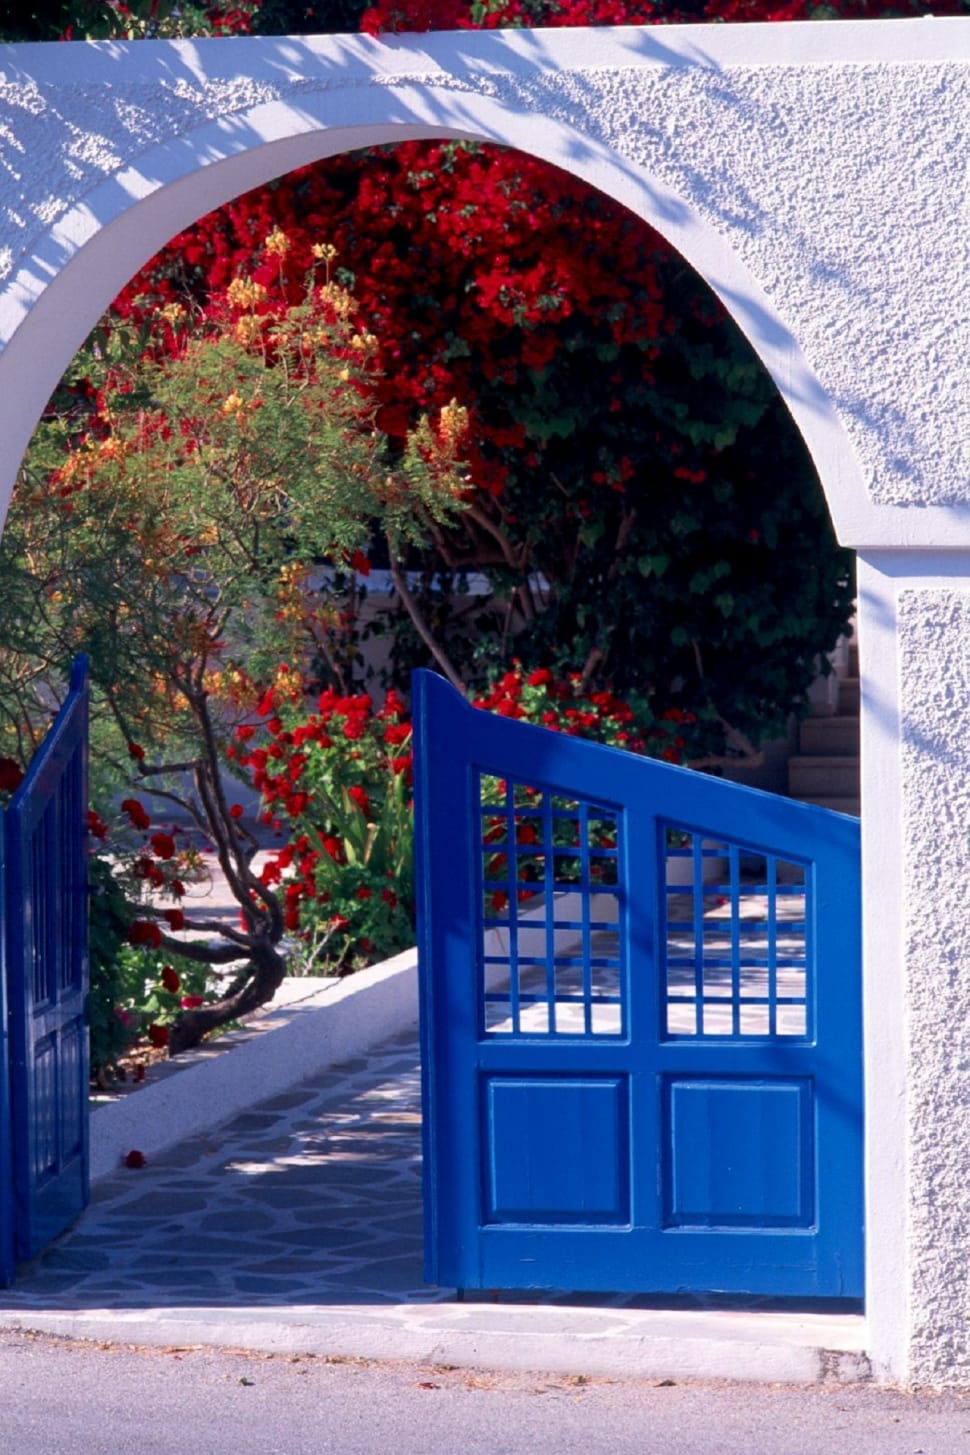 Santorini, Gate, Arch, Village, Island, outdoors, day preview